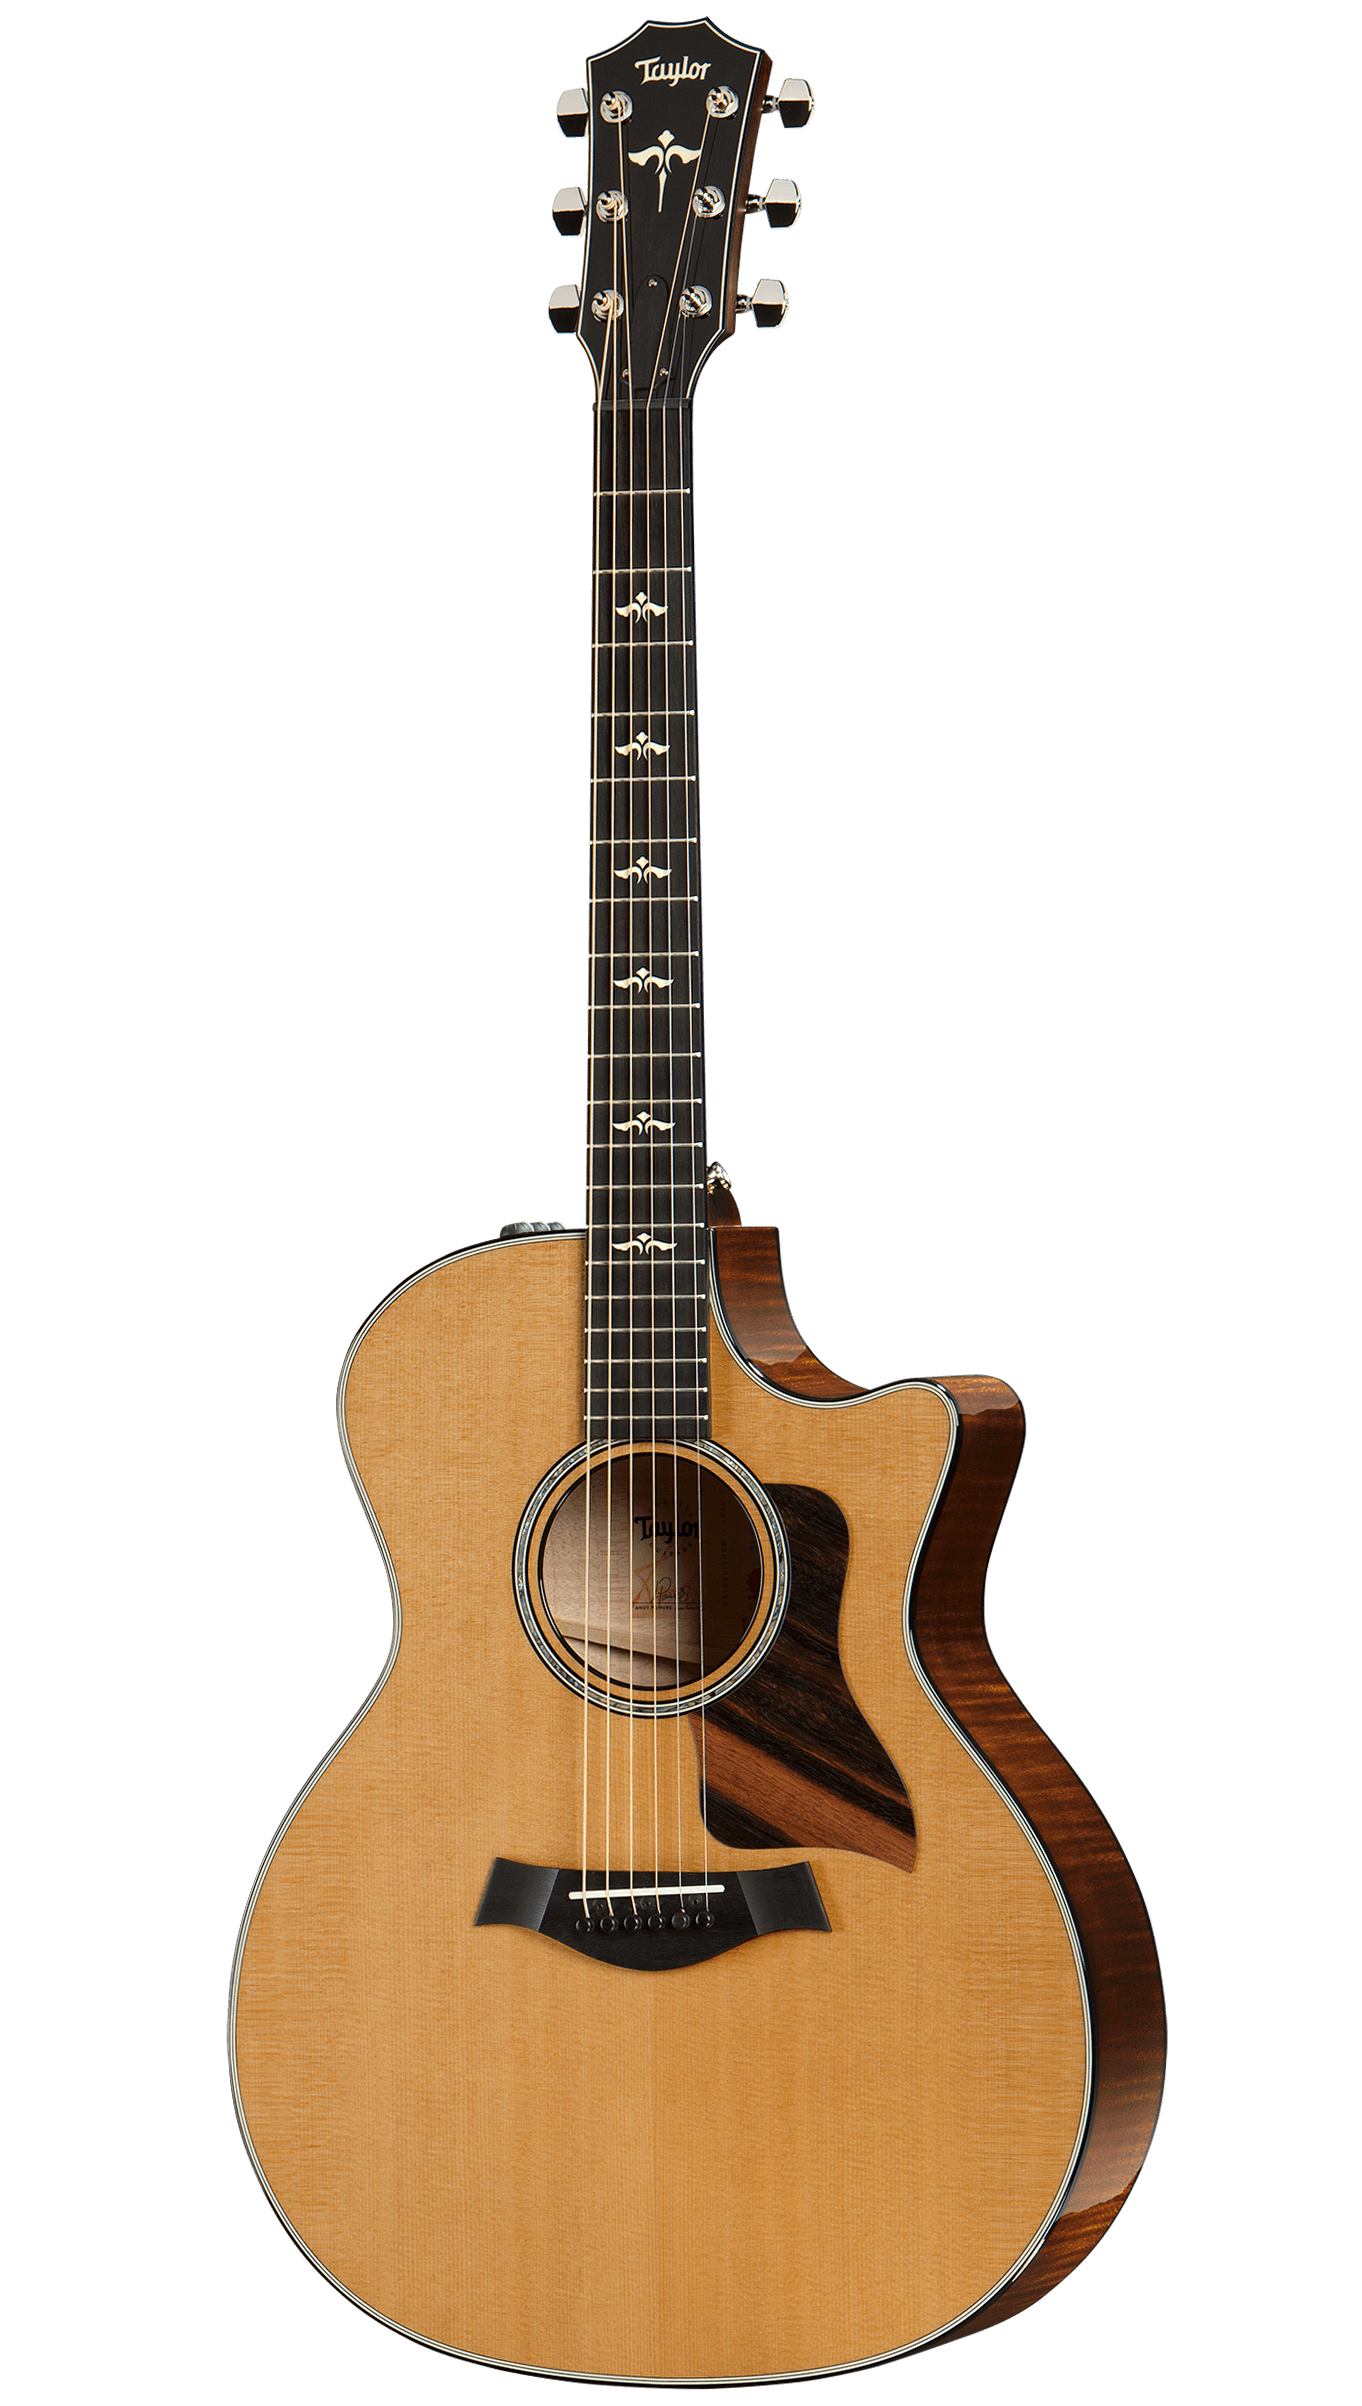 TAYLOR 614CE - BROWN SUGAR STAIN WITH V-CLASS BRACING AND HARDCASE (614-CE / 614 CE), TAYLOR, ACOUSTIC GUITAR, taylor-acoustic-guitar-614ce, ZOSO MUSIC SDN BHD